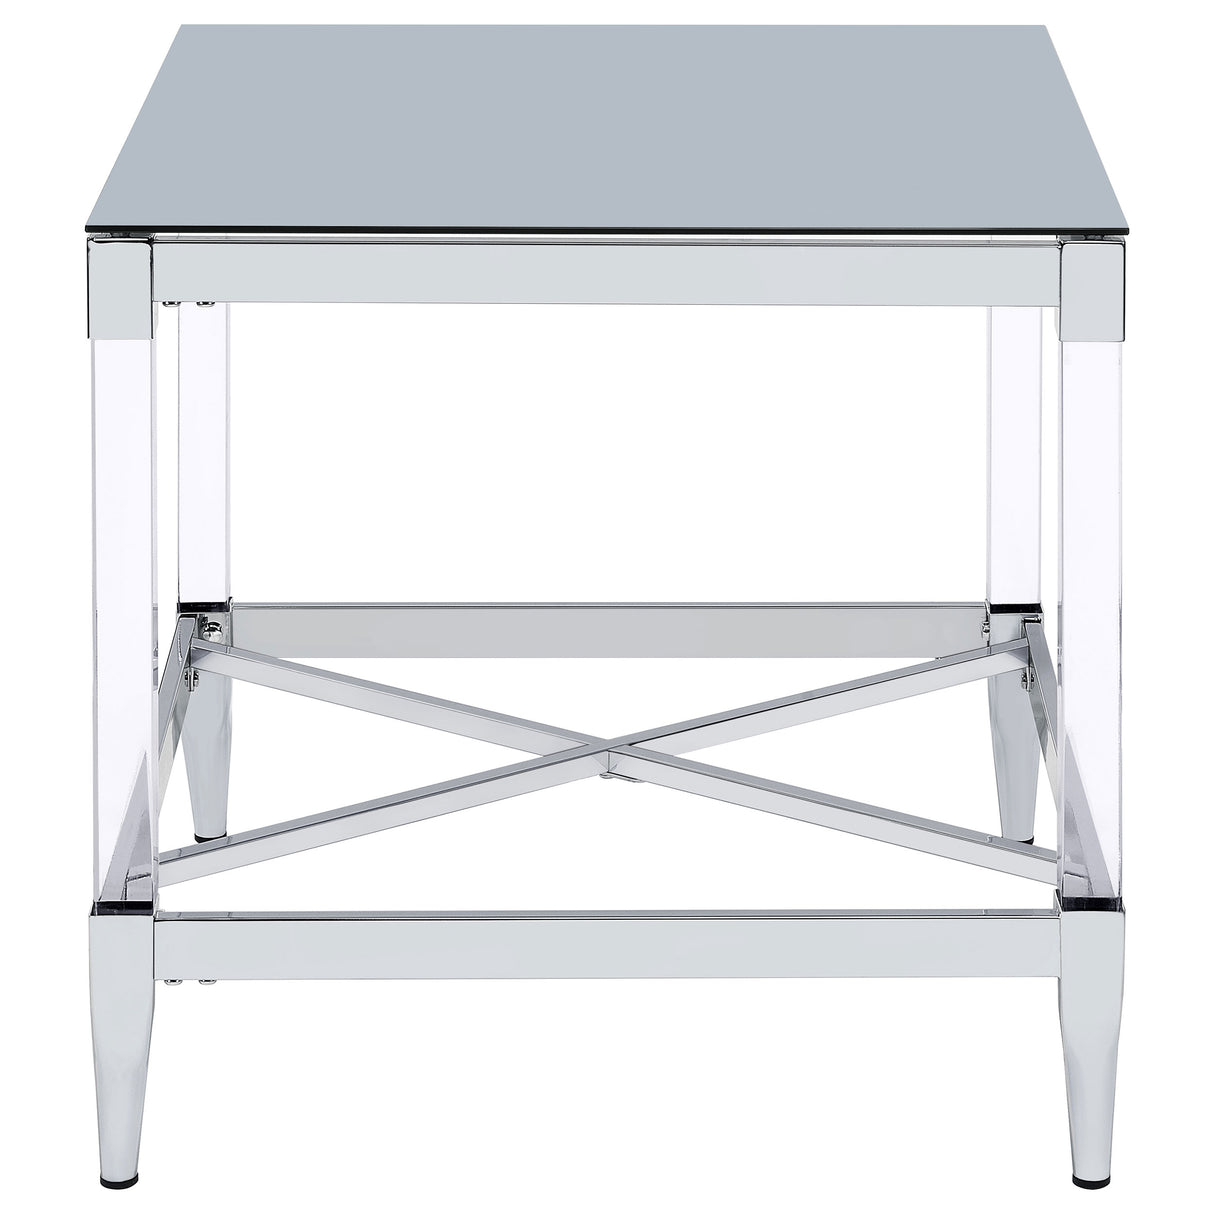 End Table - Lindley Square End Table with Acrylic Legs and Tempered Mirror Top Chrome